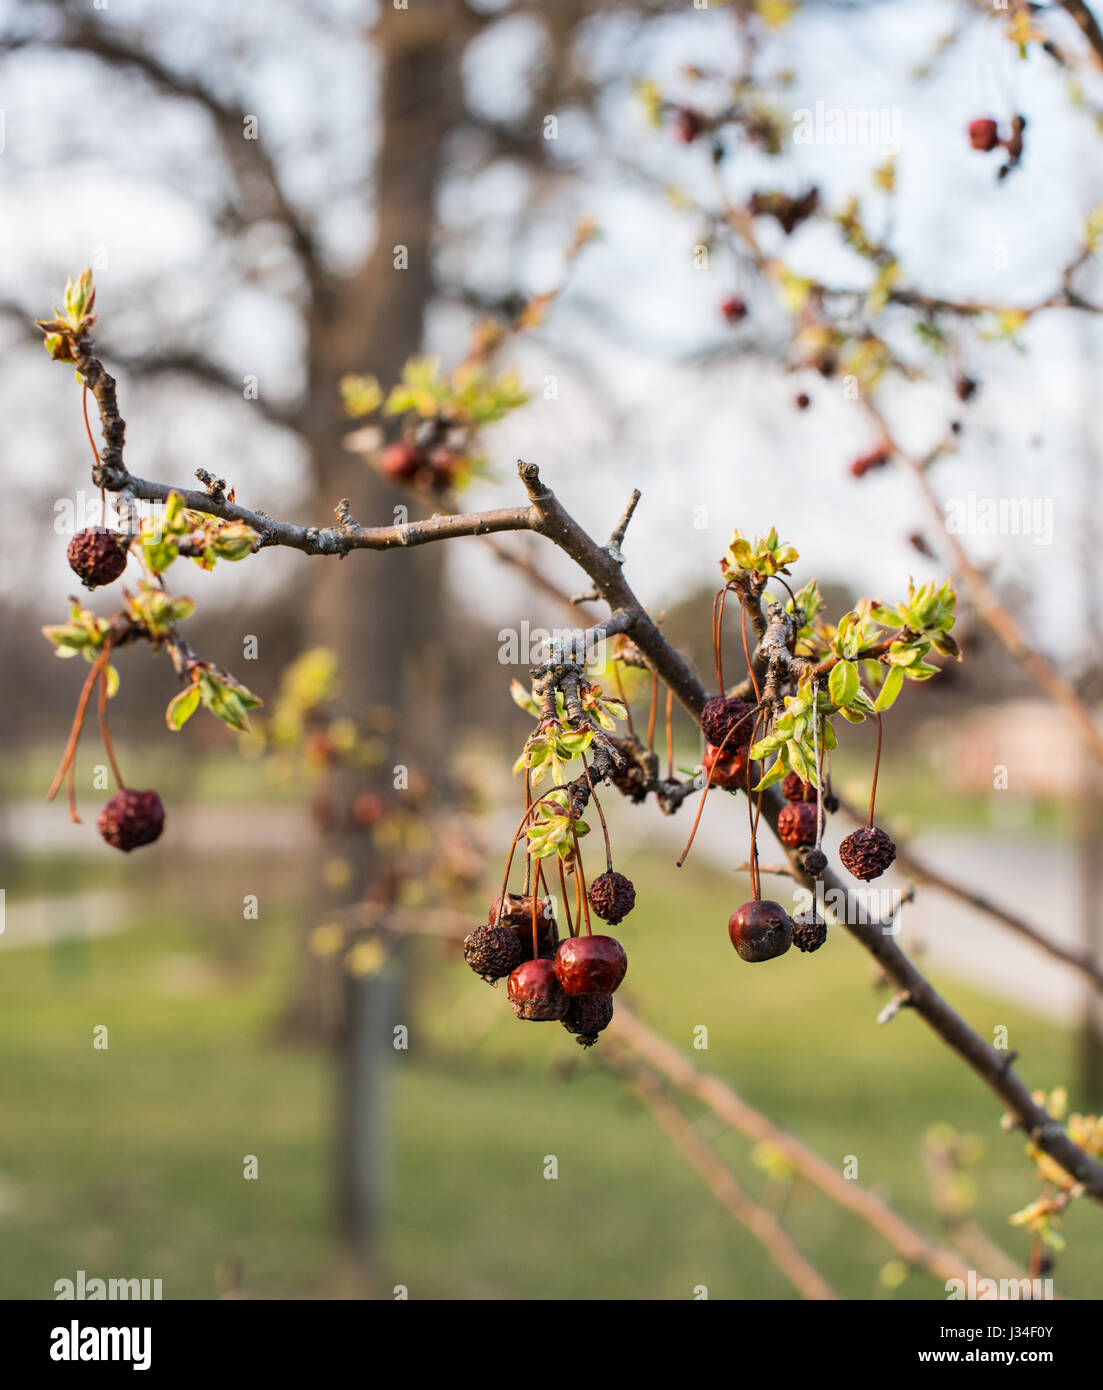 Dead berries on a tree branch with leaf buds forming on a warm day in Indiana in March. Stock Photo